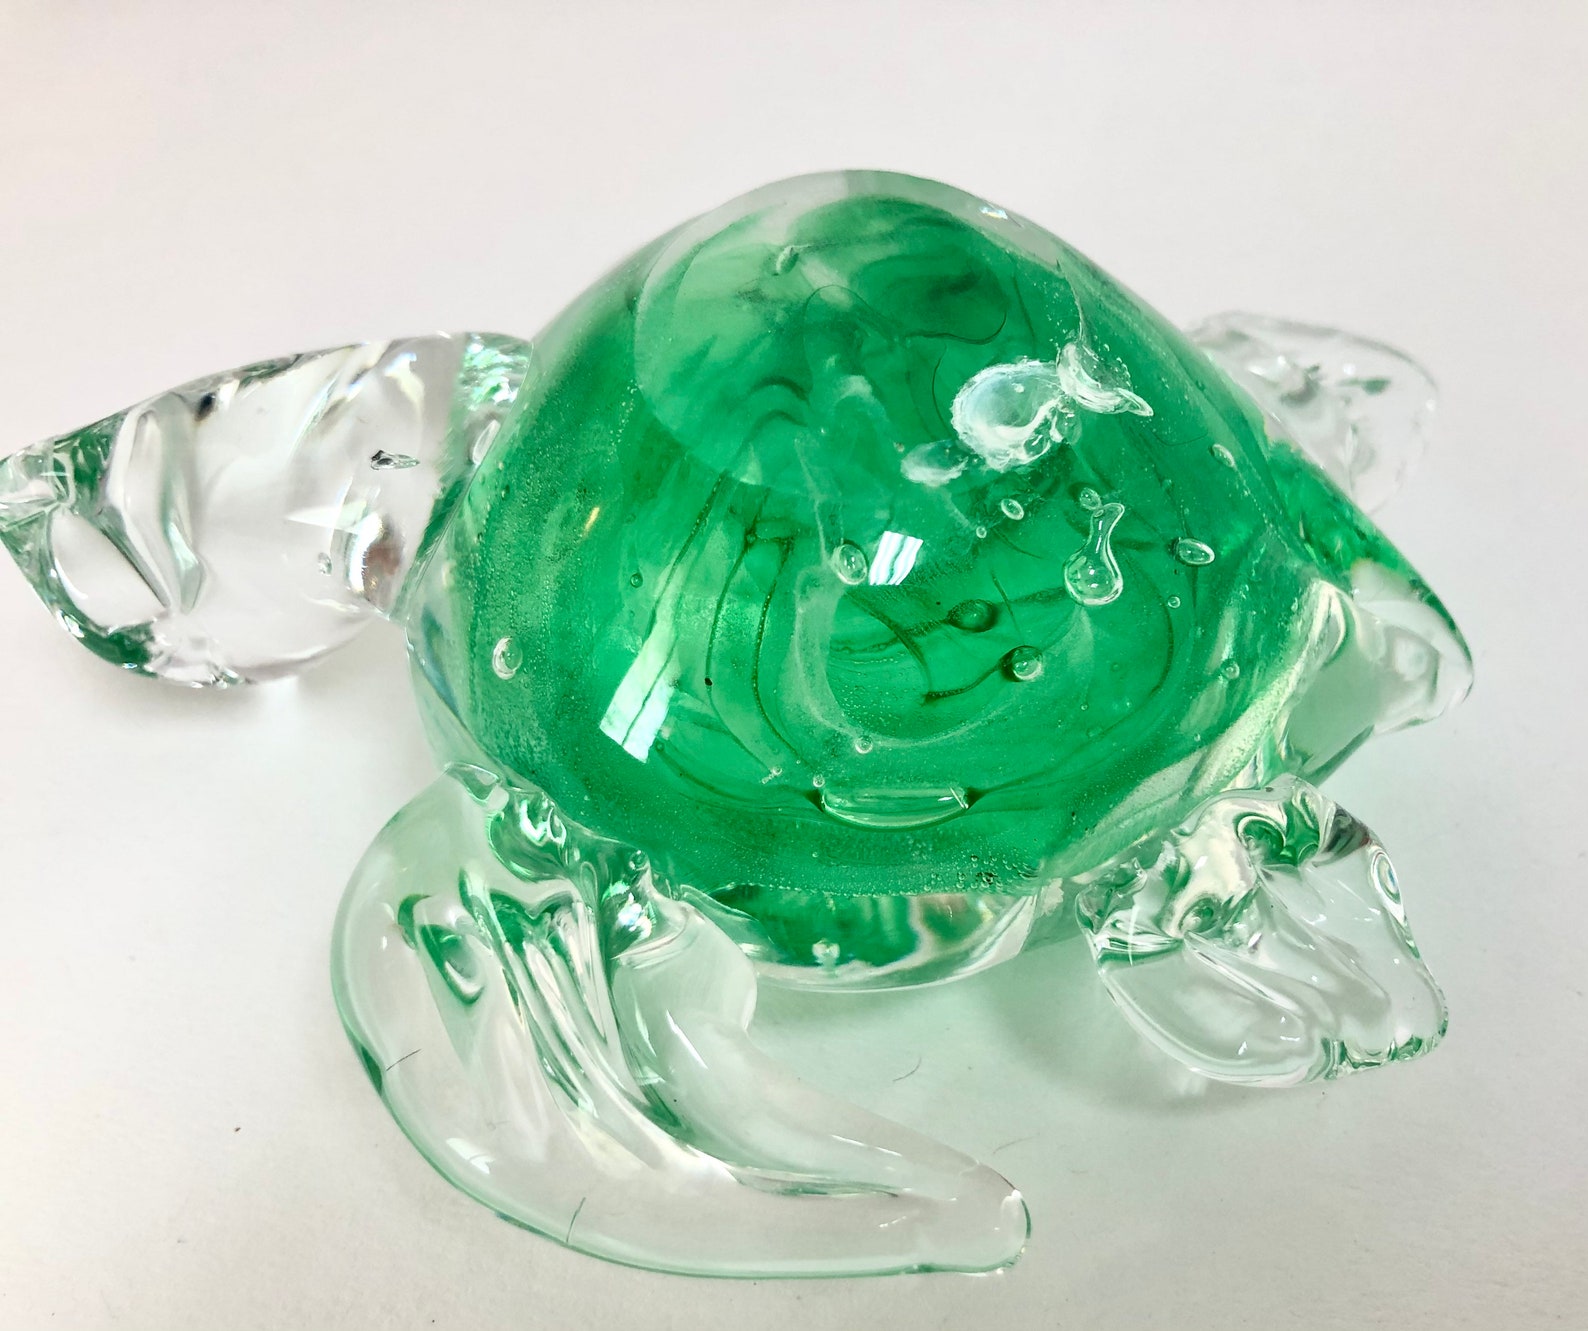 Handcrafted art glass sea turtle. Swirled green and white | Etsy